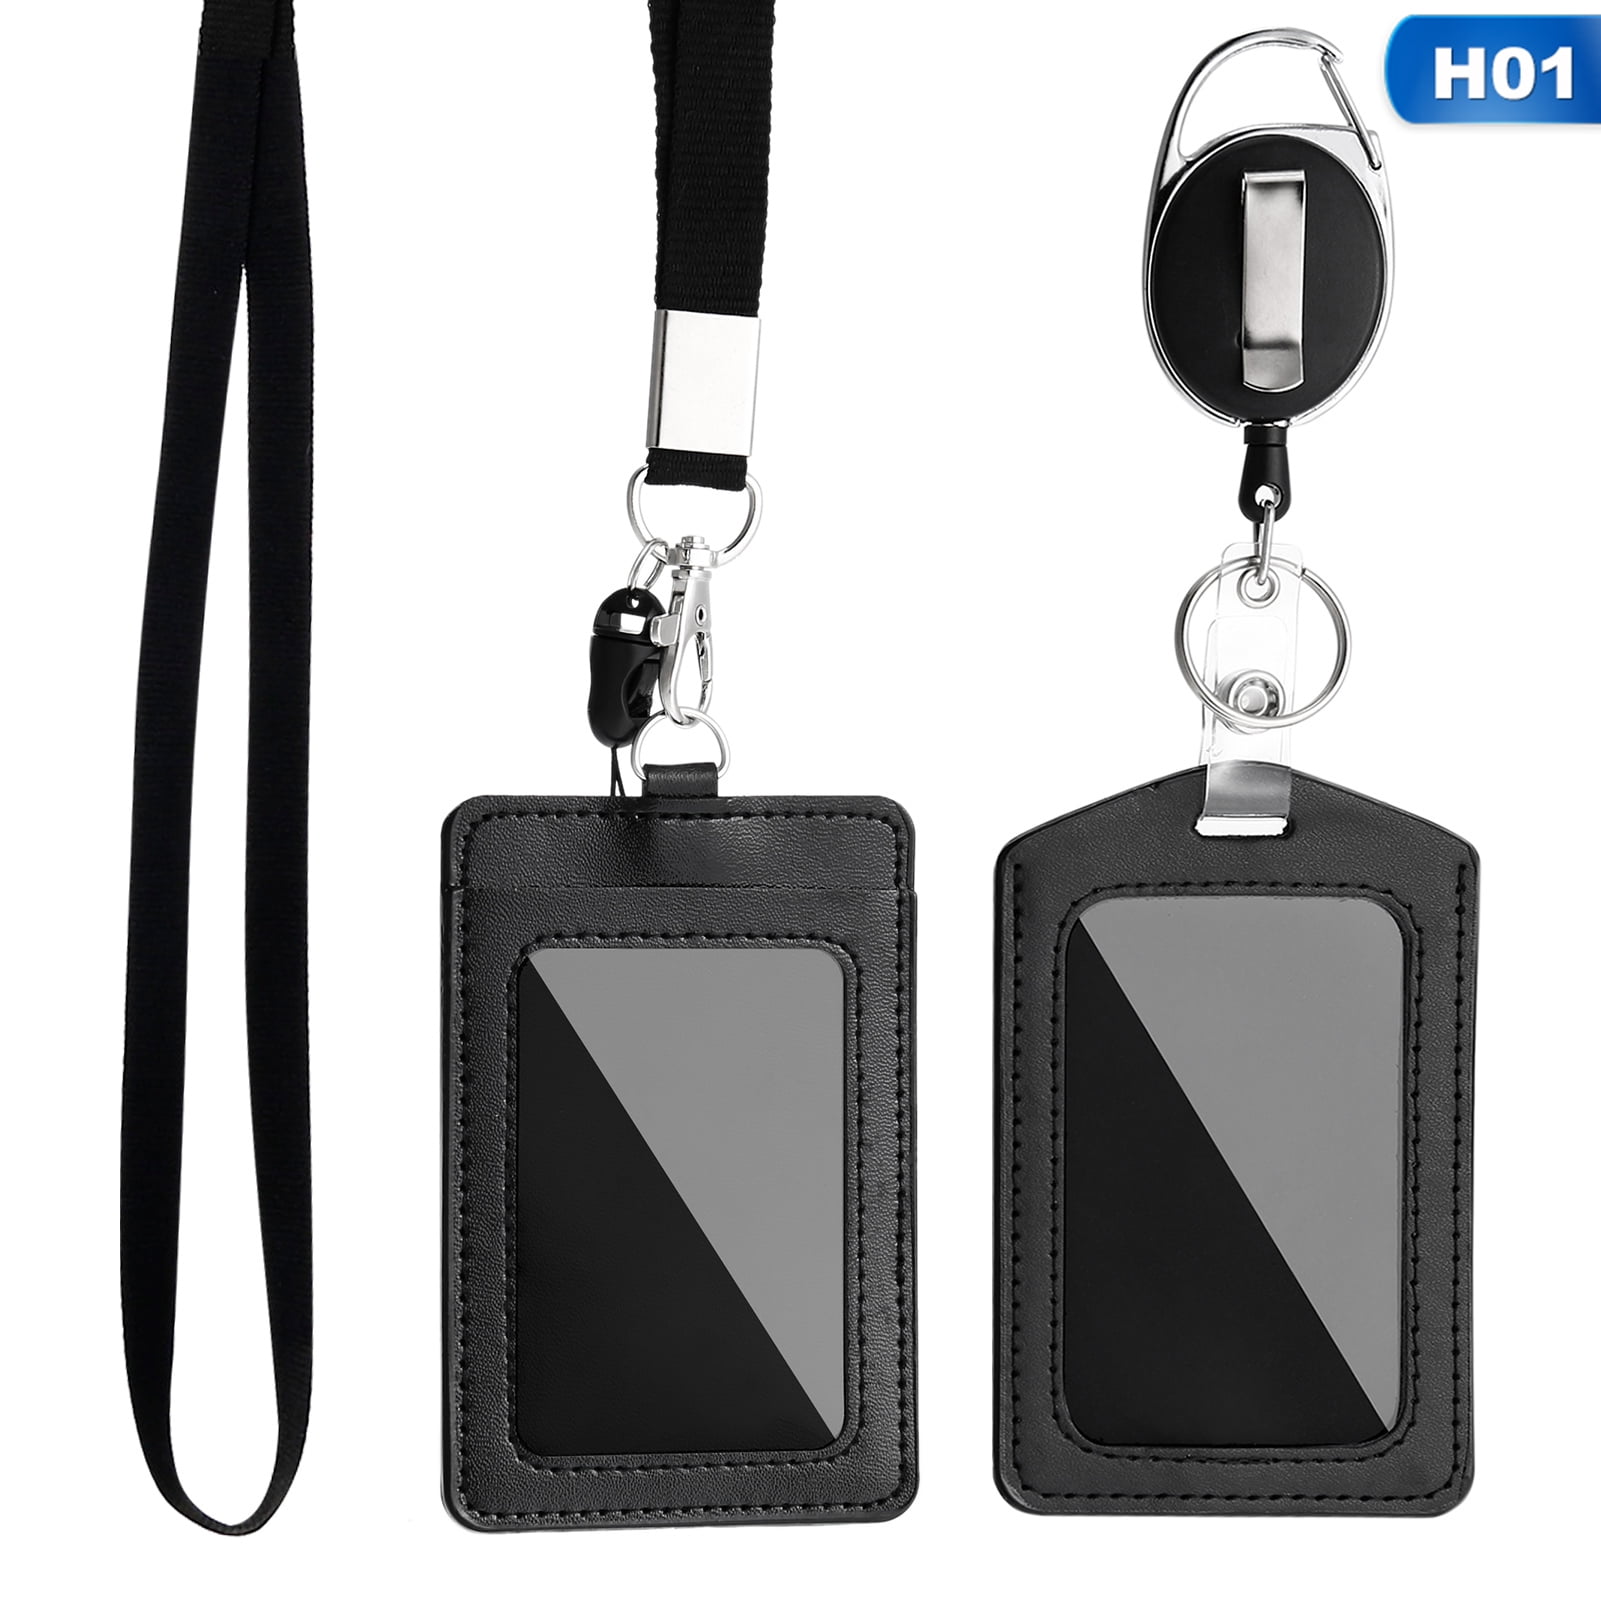 Qweryboo 2 Pack Badge Holders, Vertical Leather ID Badge Holders